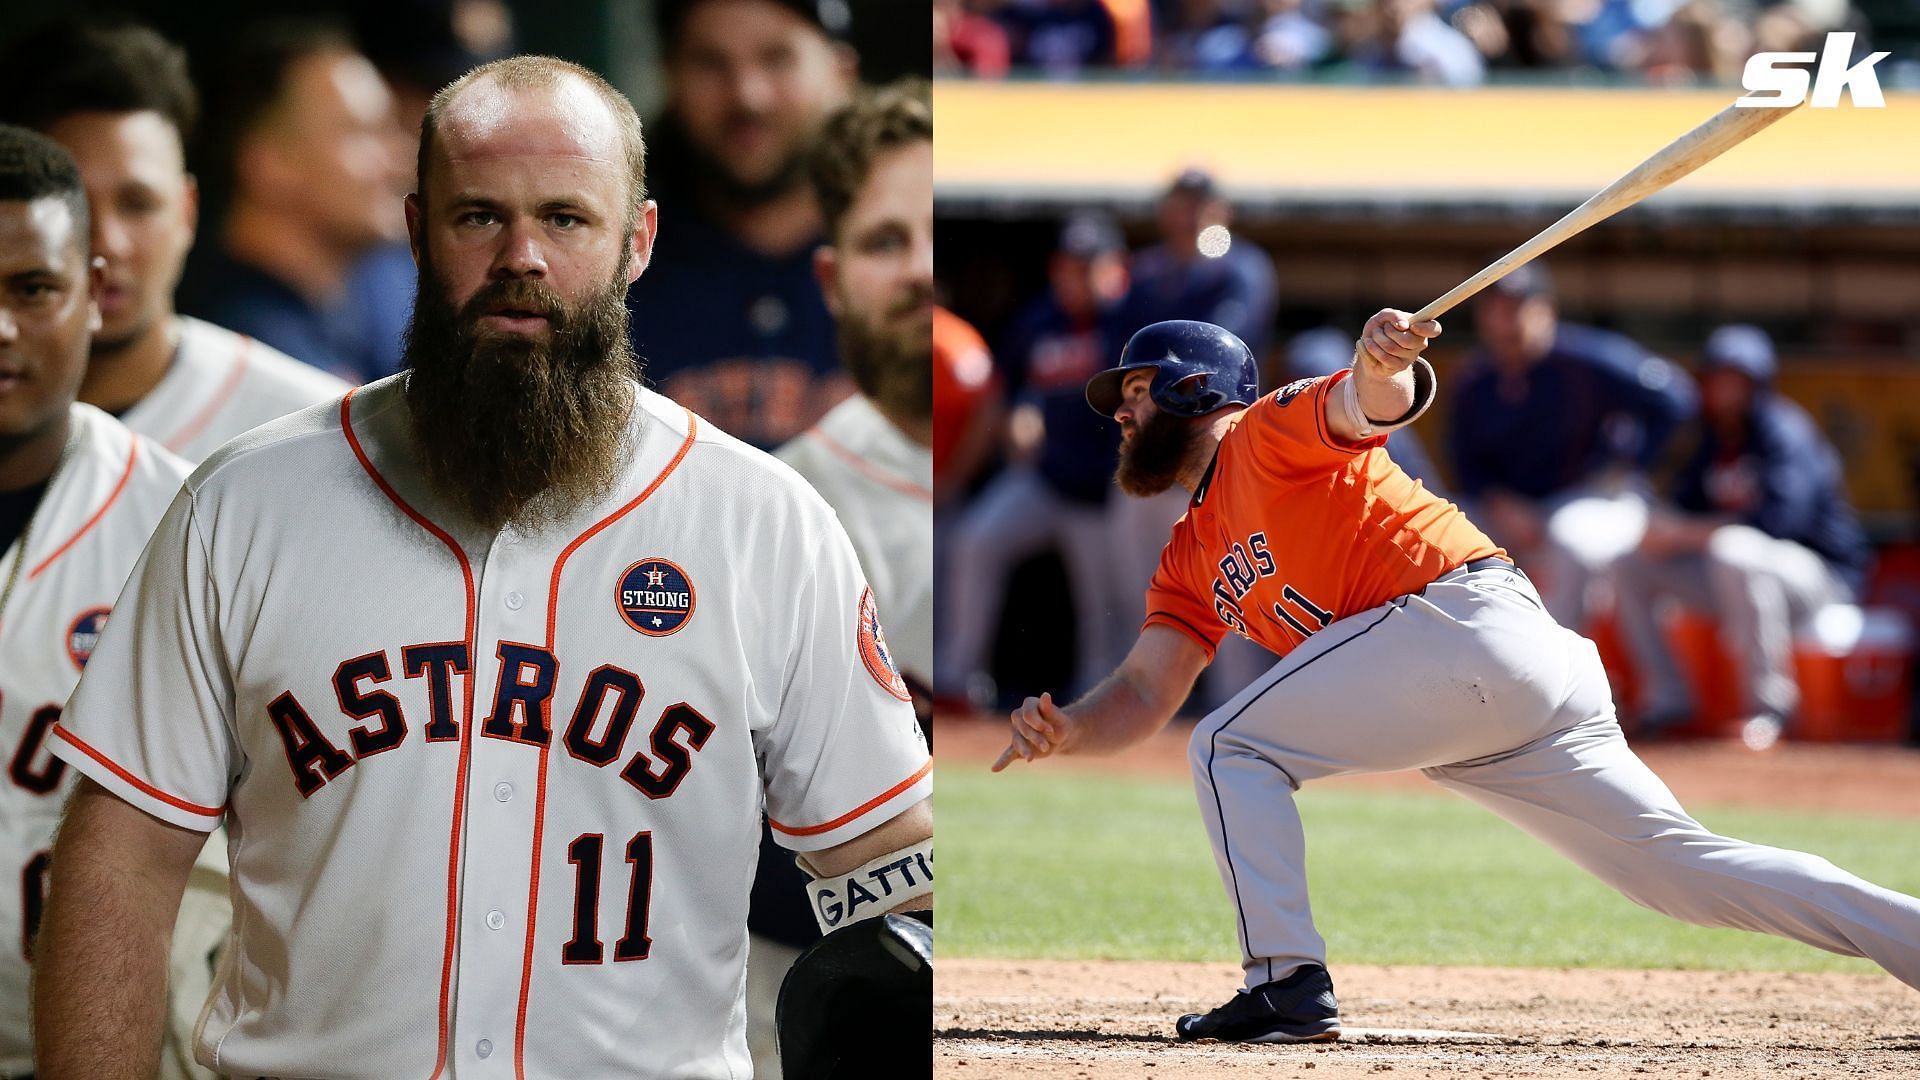 FROM JANITOR TO CHAMPION - THE EVAN GATTIS STORY 